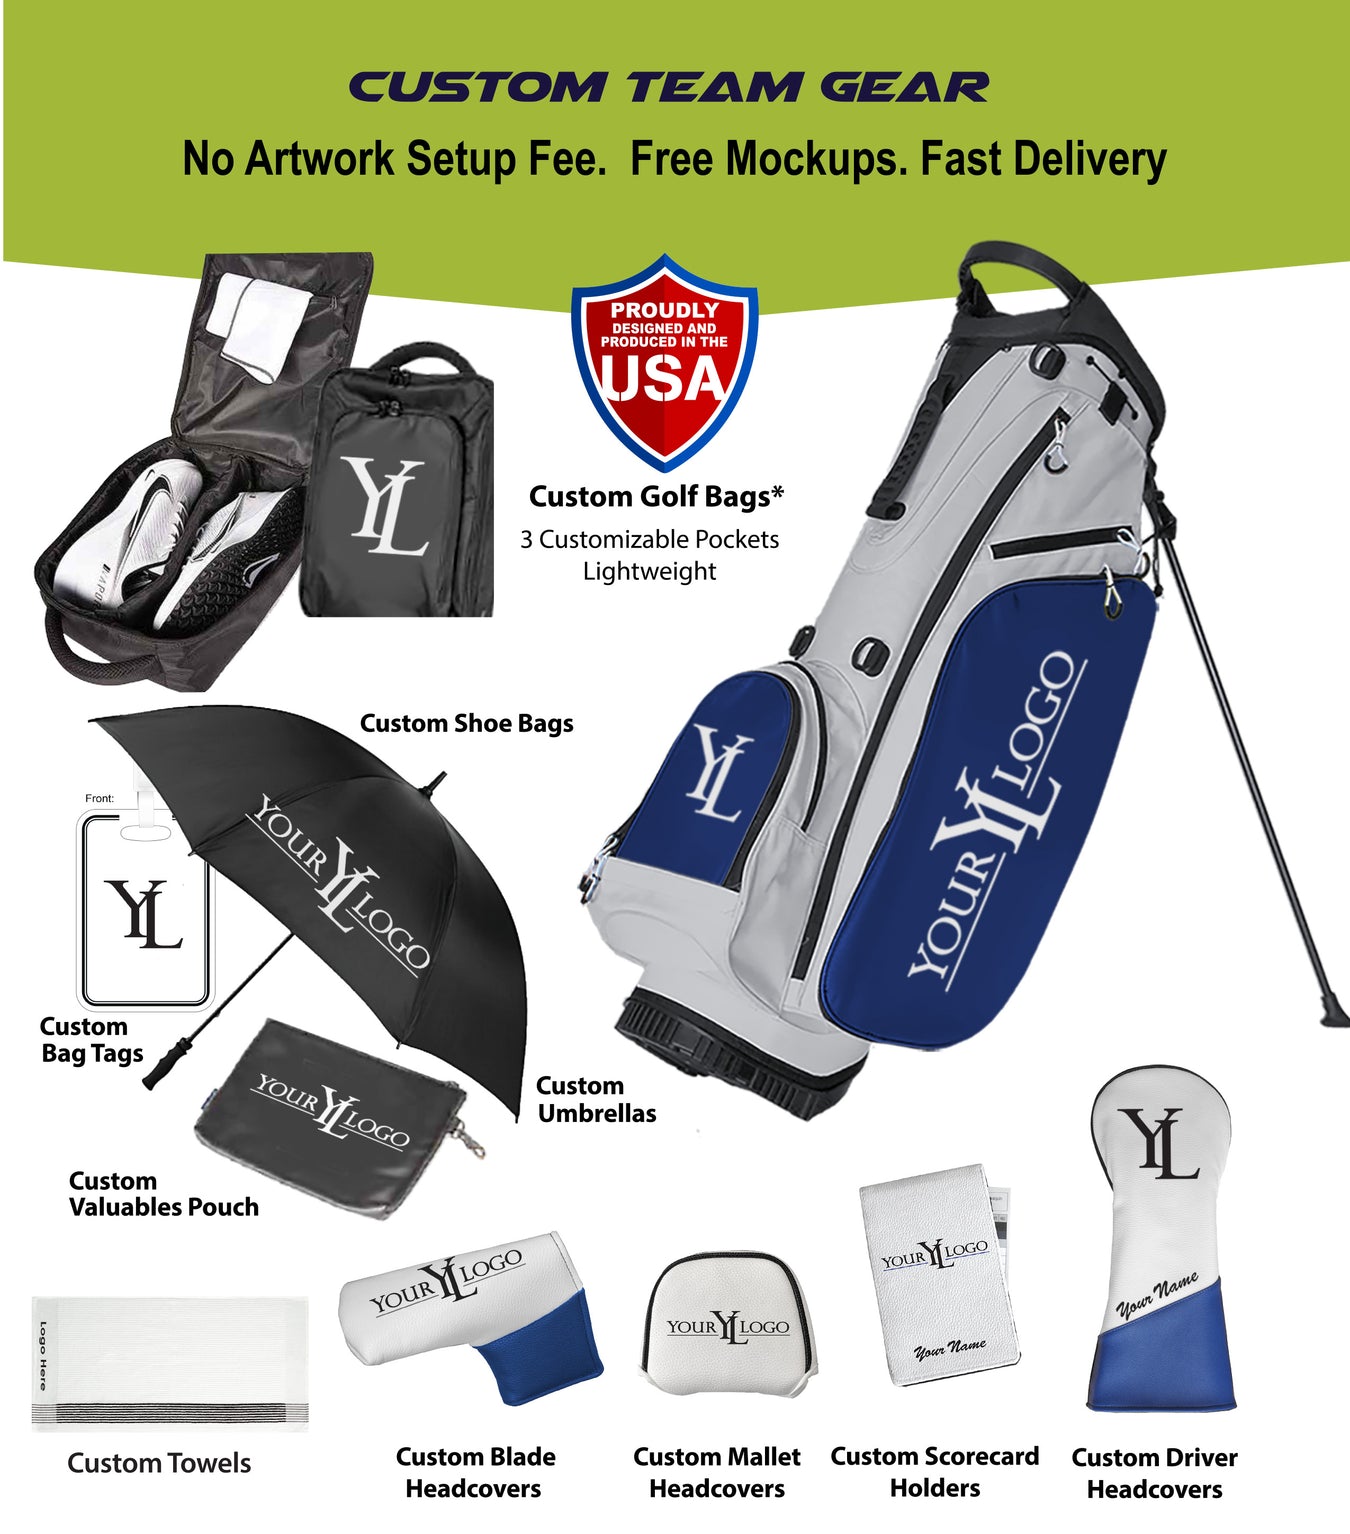 1withGolf Custom Team Gear including custom team bags, towels, shoe bags, headcovers and more